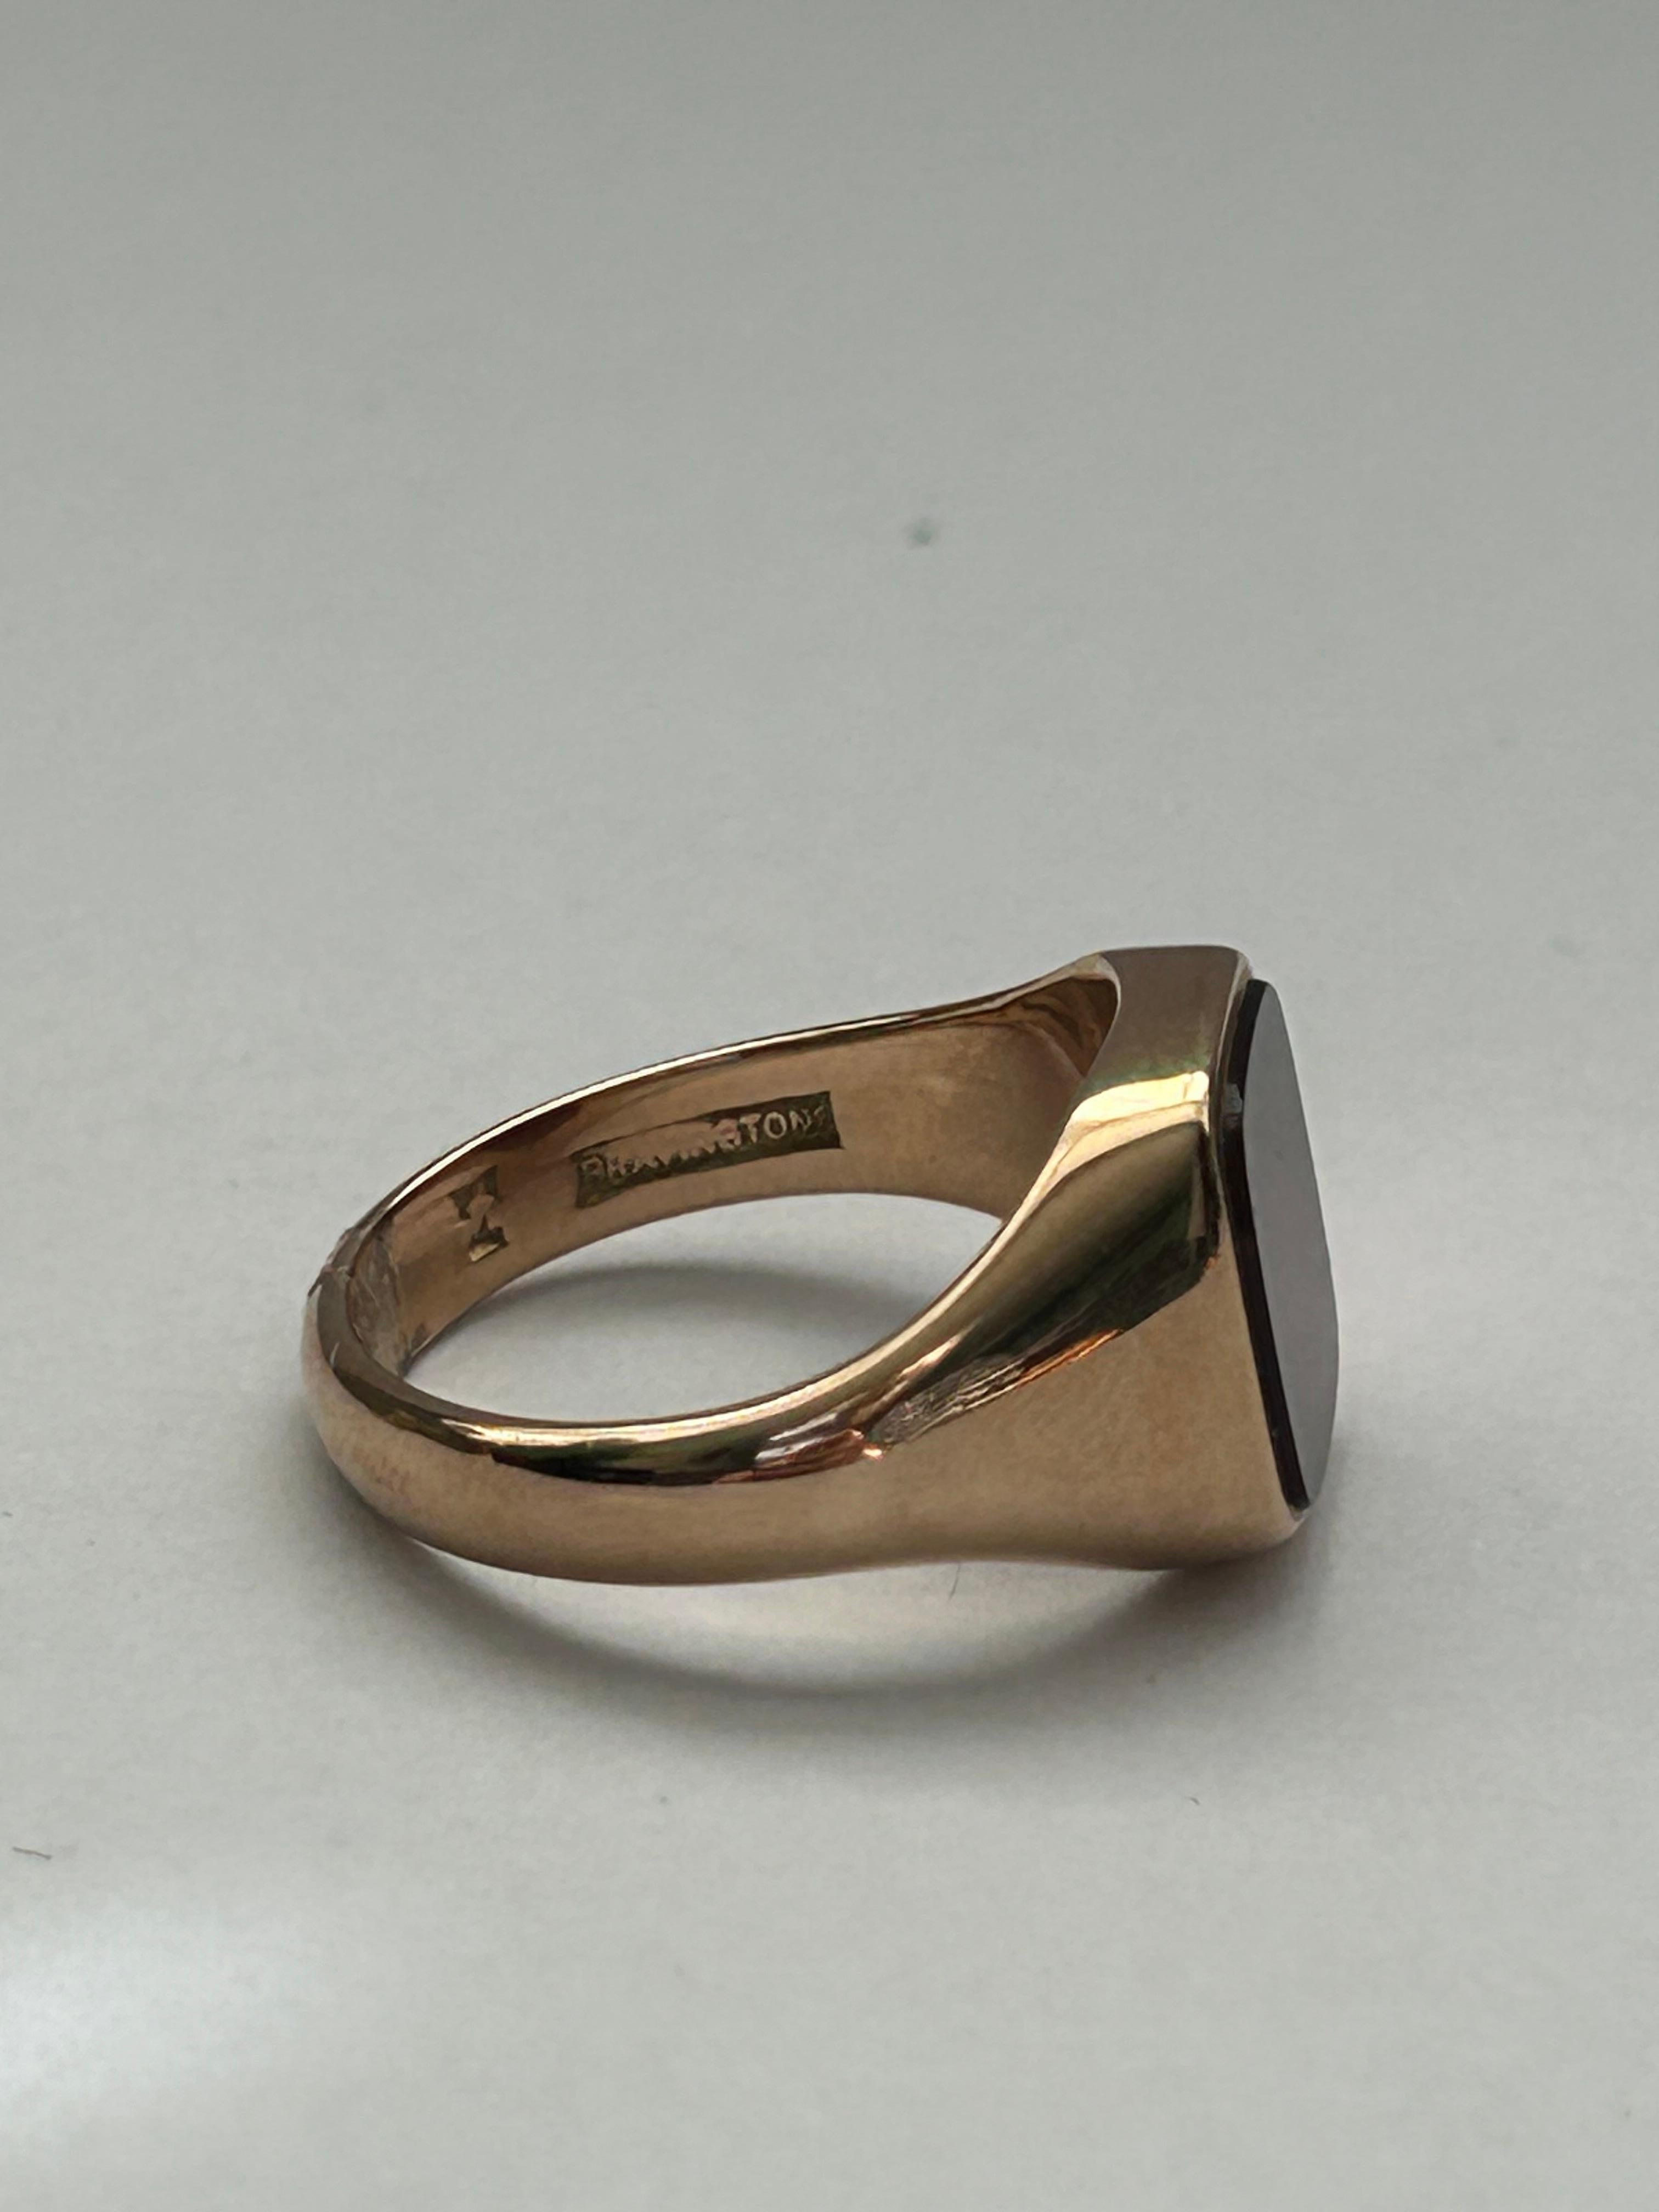 9ct Yellow Gold Cornelian Ring, Size US 9 1/2, H/M '64 In Excellent Condition For Sale In Canterbury, GB